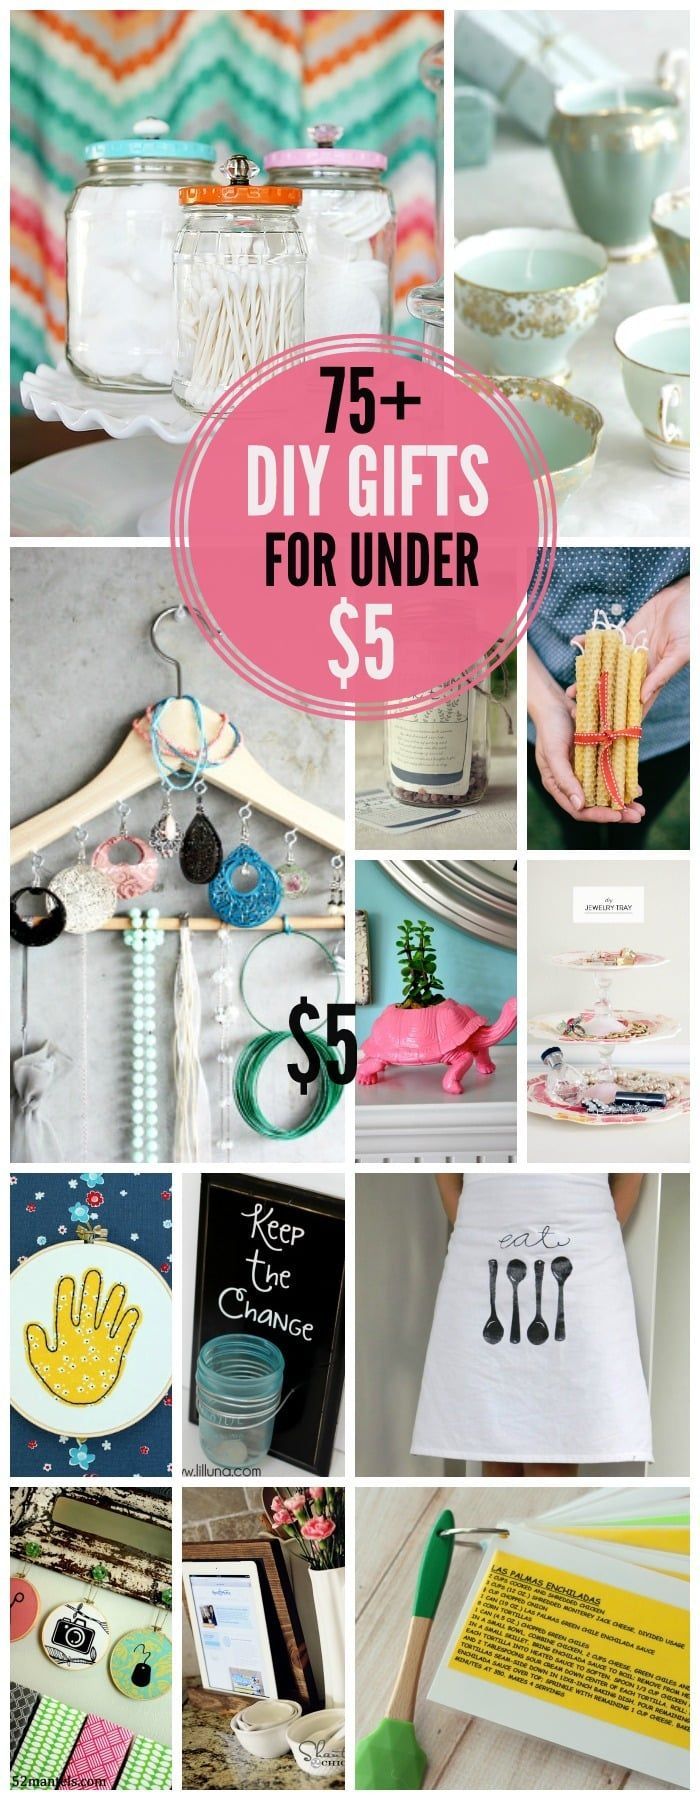 Inexpensive Gift Ideas - Inexpensive Gift Ideas -   19 diy Gifts inexpensive ideas